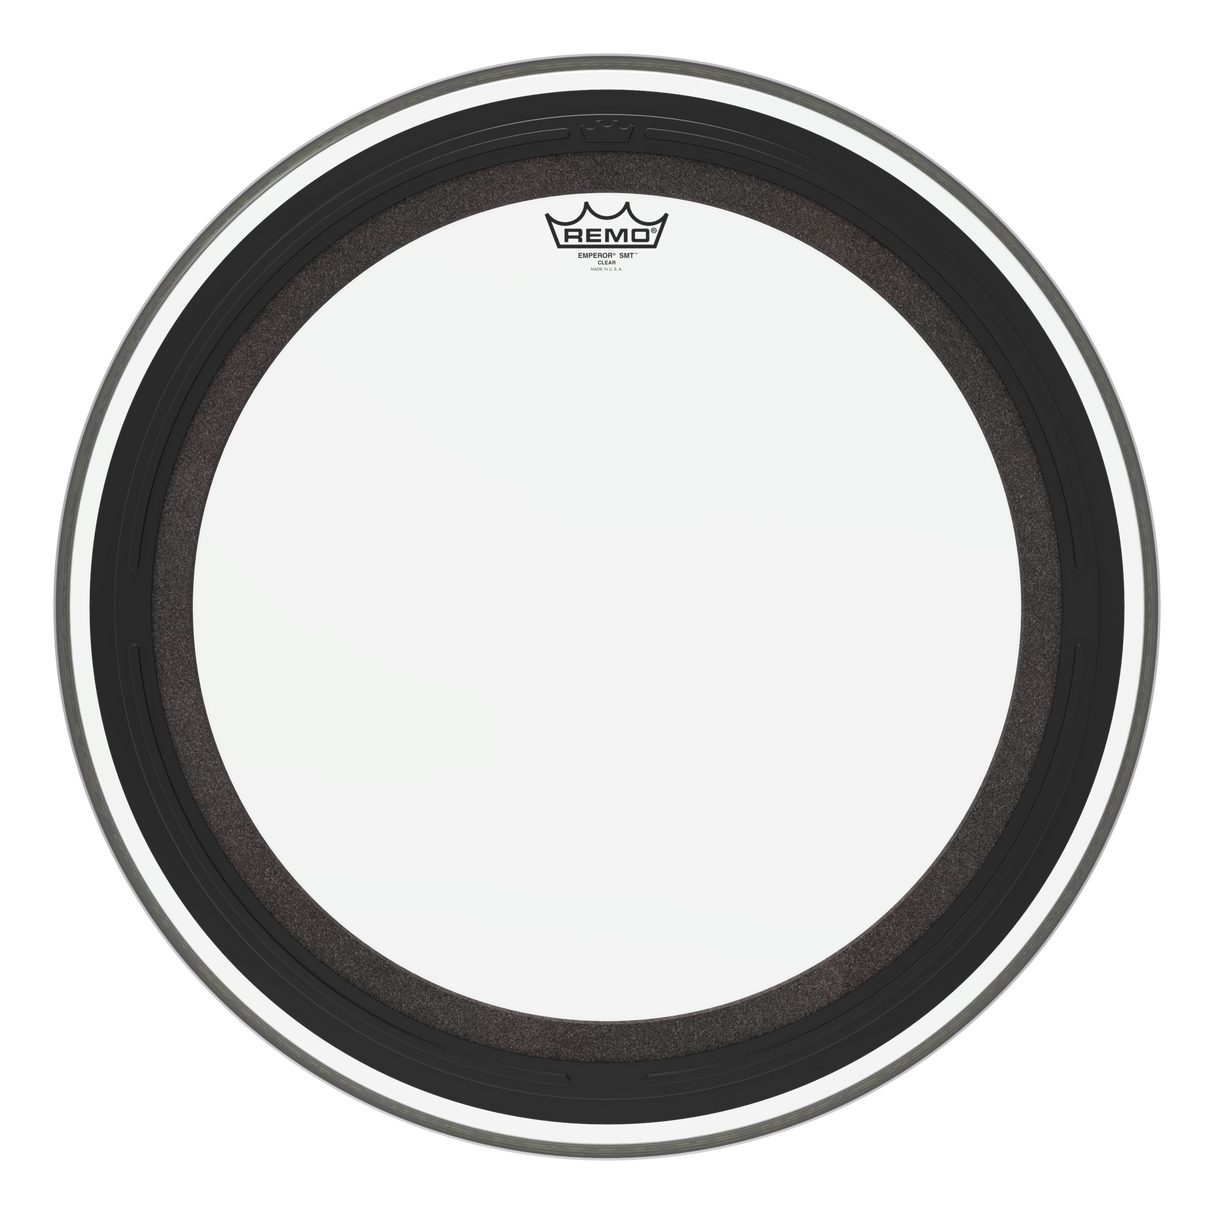 Remo Emperor SMT Bass Drum Heads - Clear